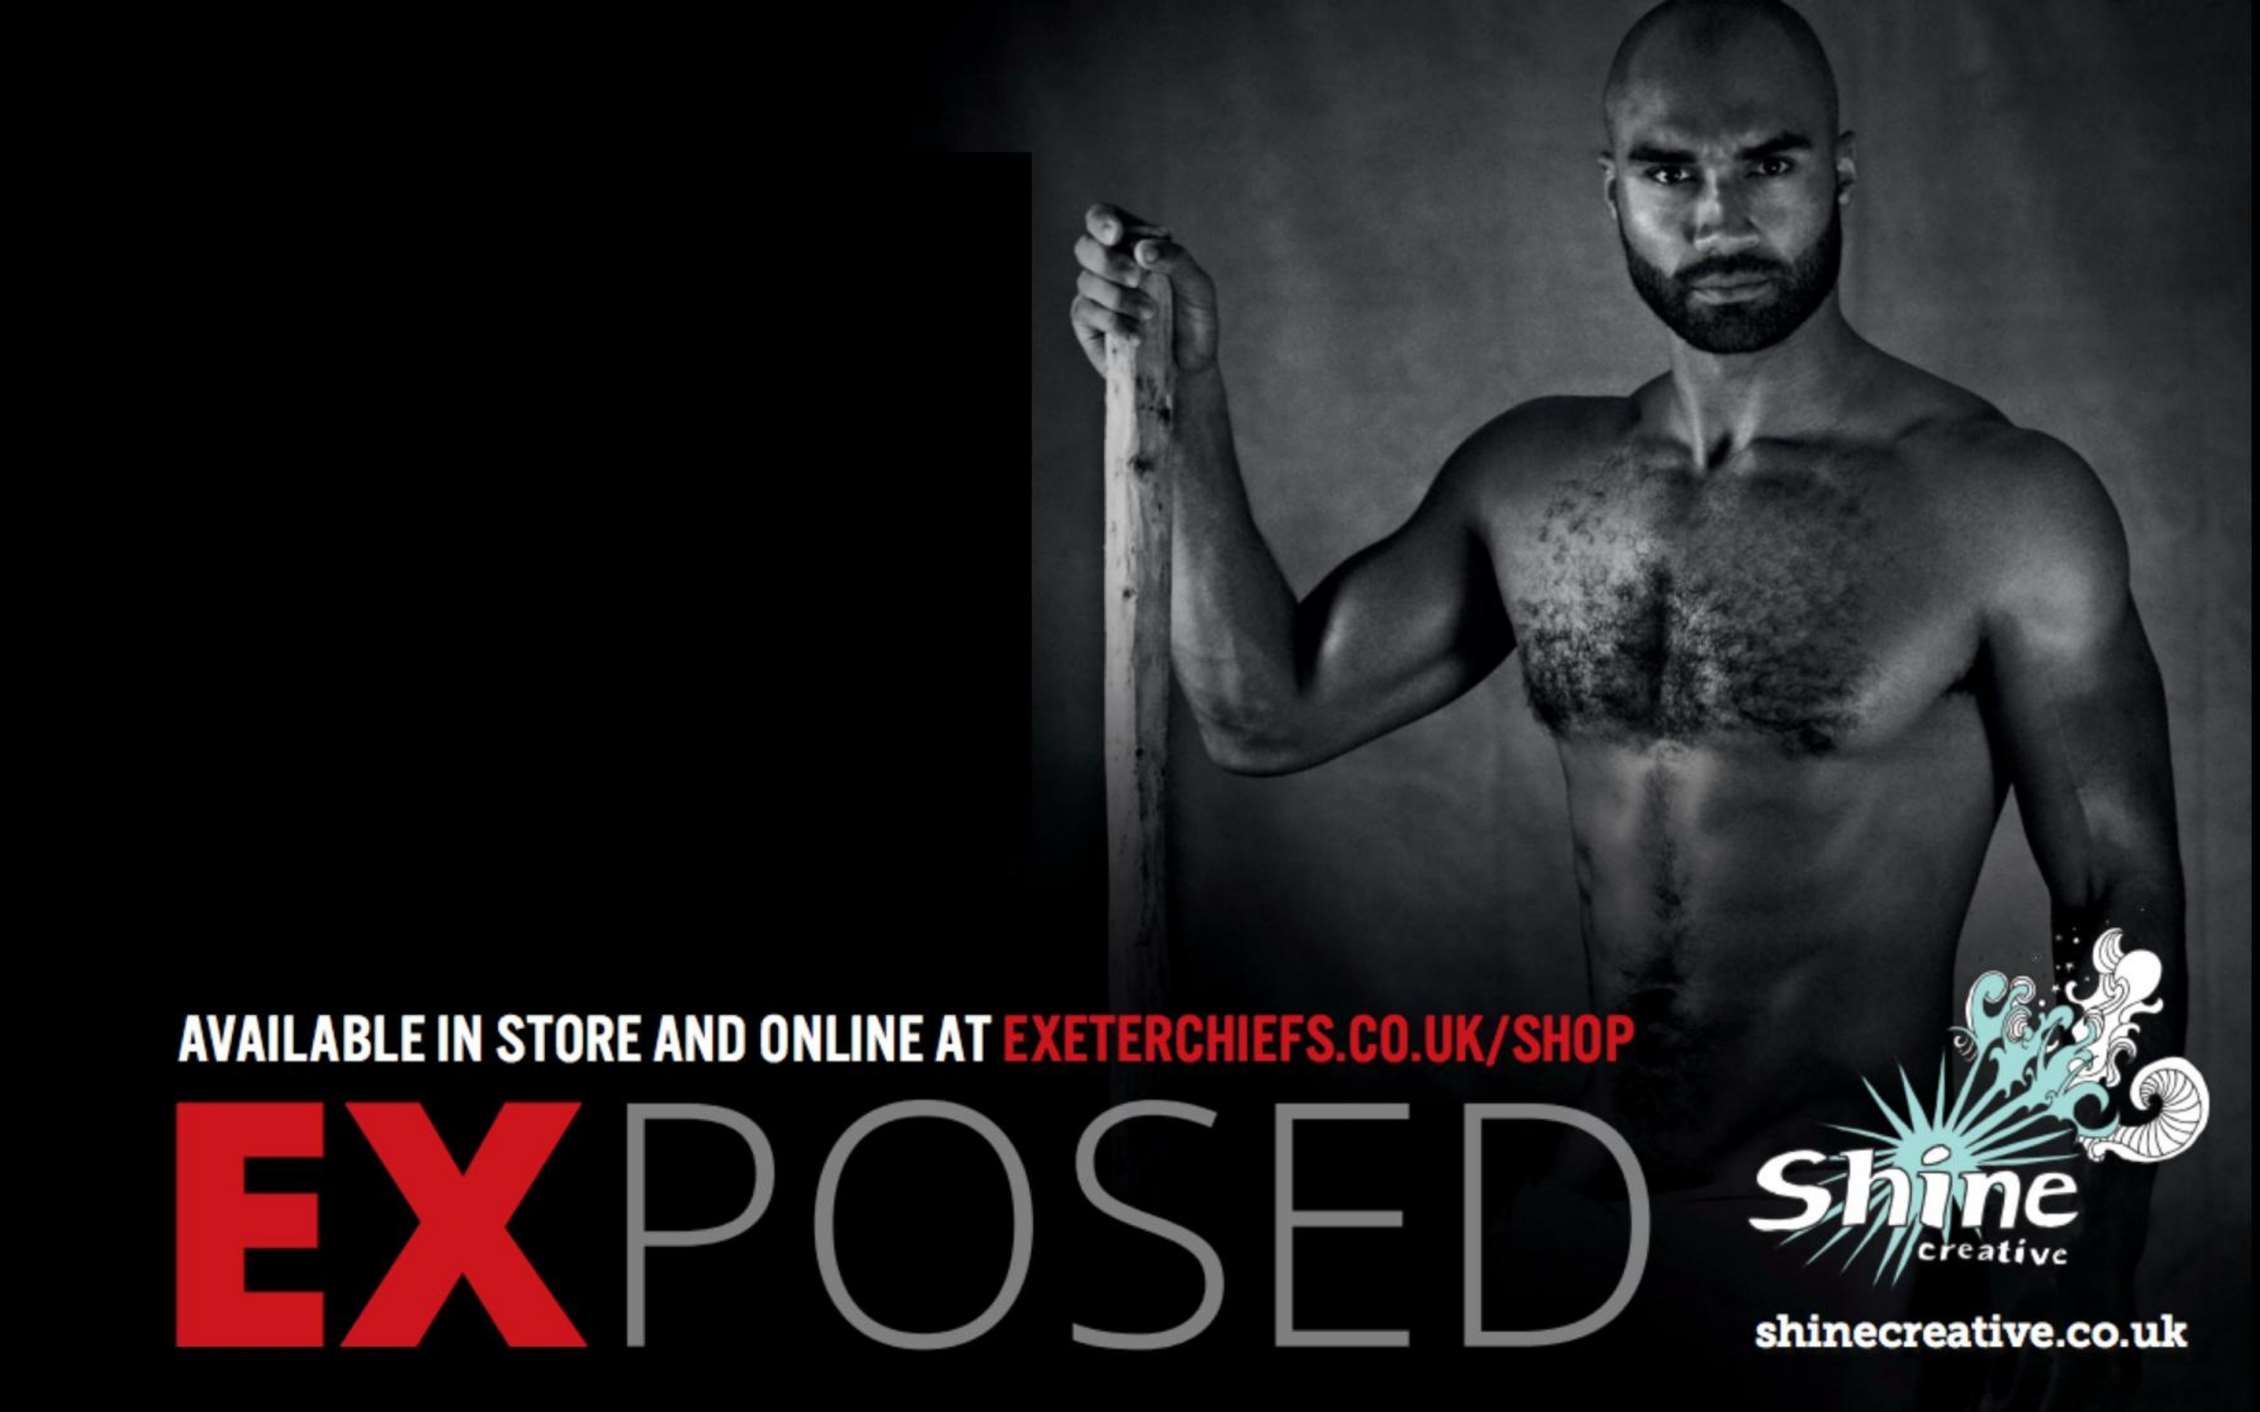 New Exposed Calendar launches today